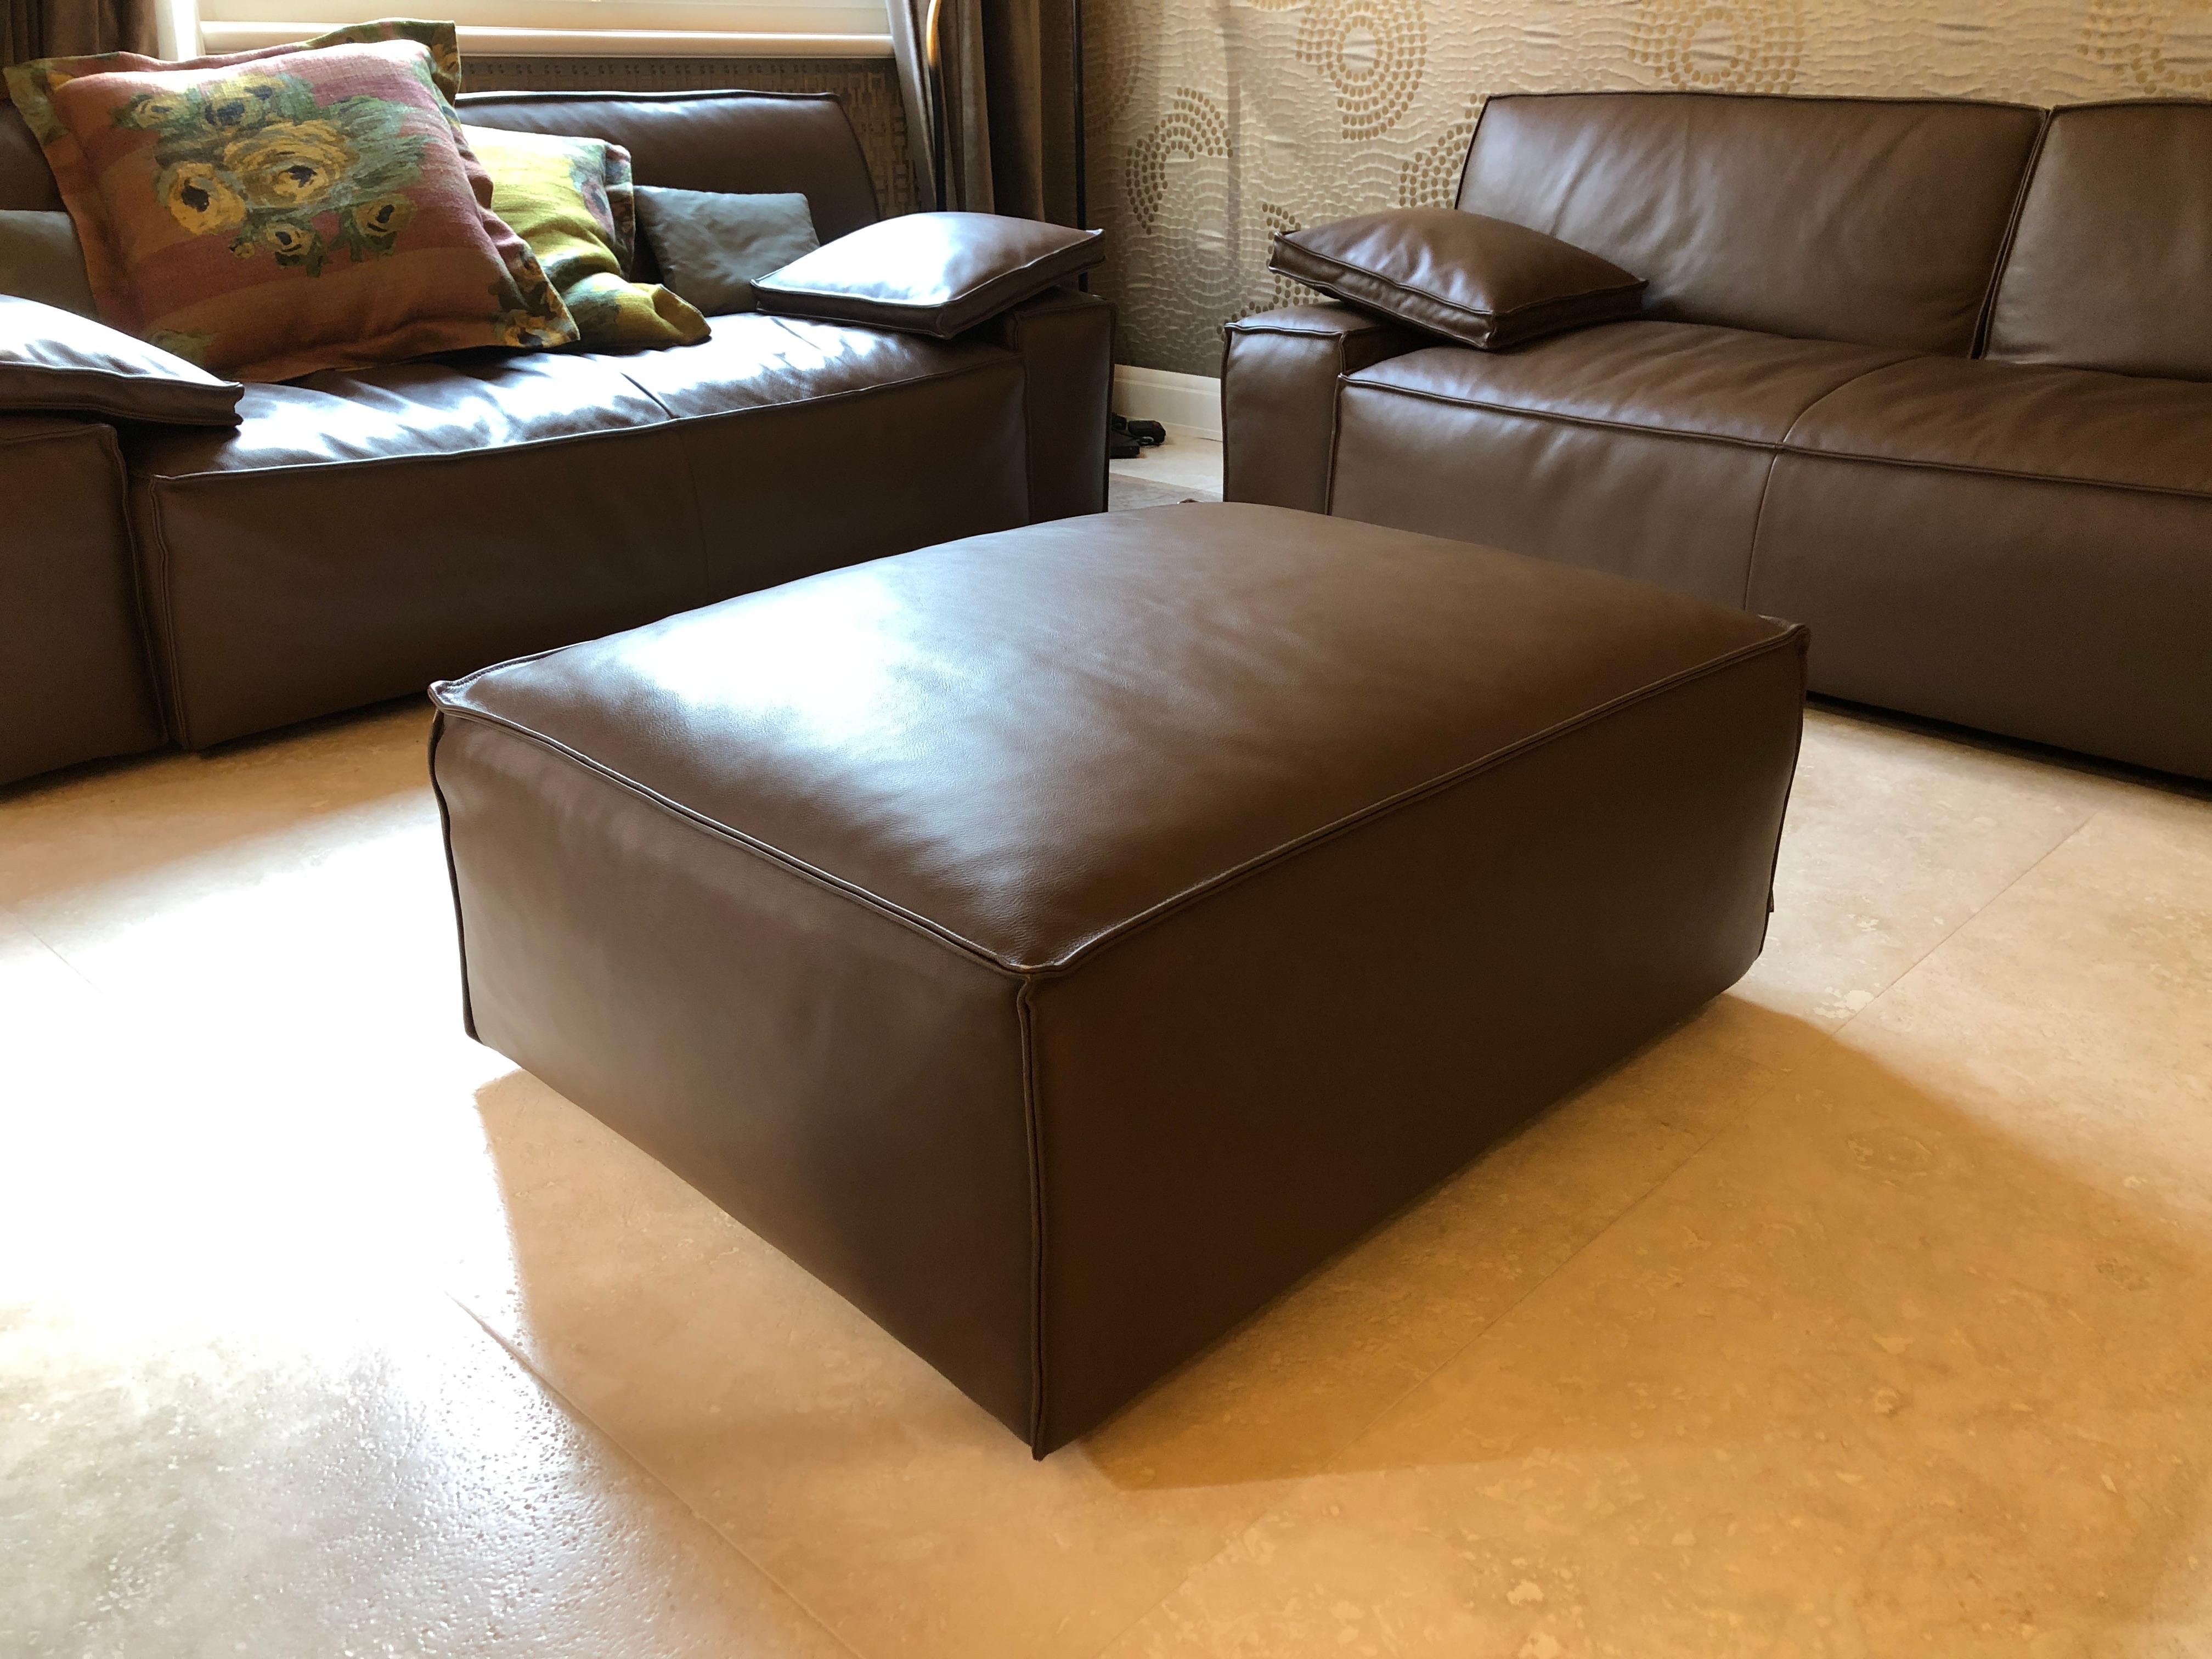 A ottoman part of My World collection designed by Philippe Starck for Cassina in 2003 

Footrest ottoman in leather, brown finish. 

The frame is in tubular steel equipped with elastic straps and the padding of the structure is in flexible